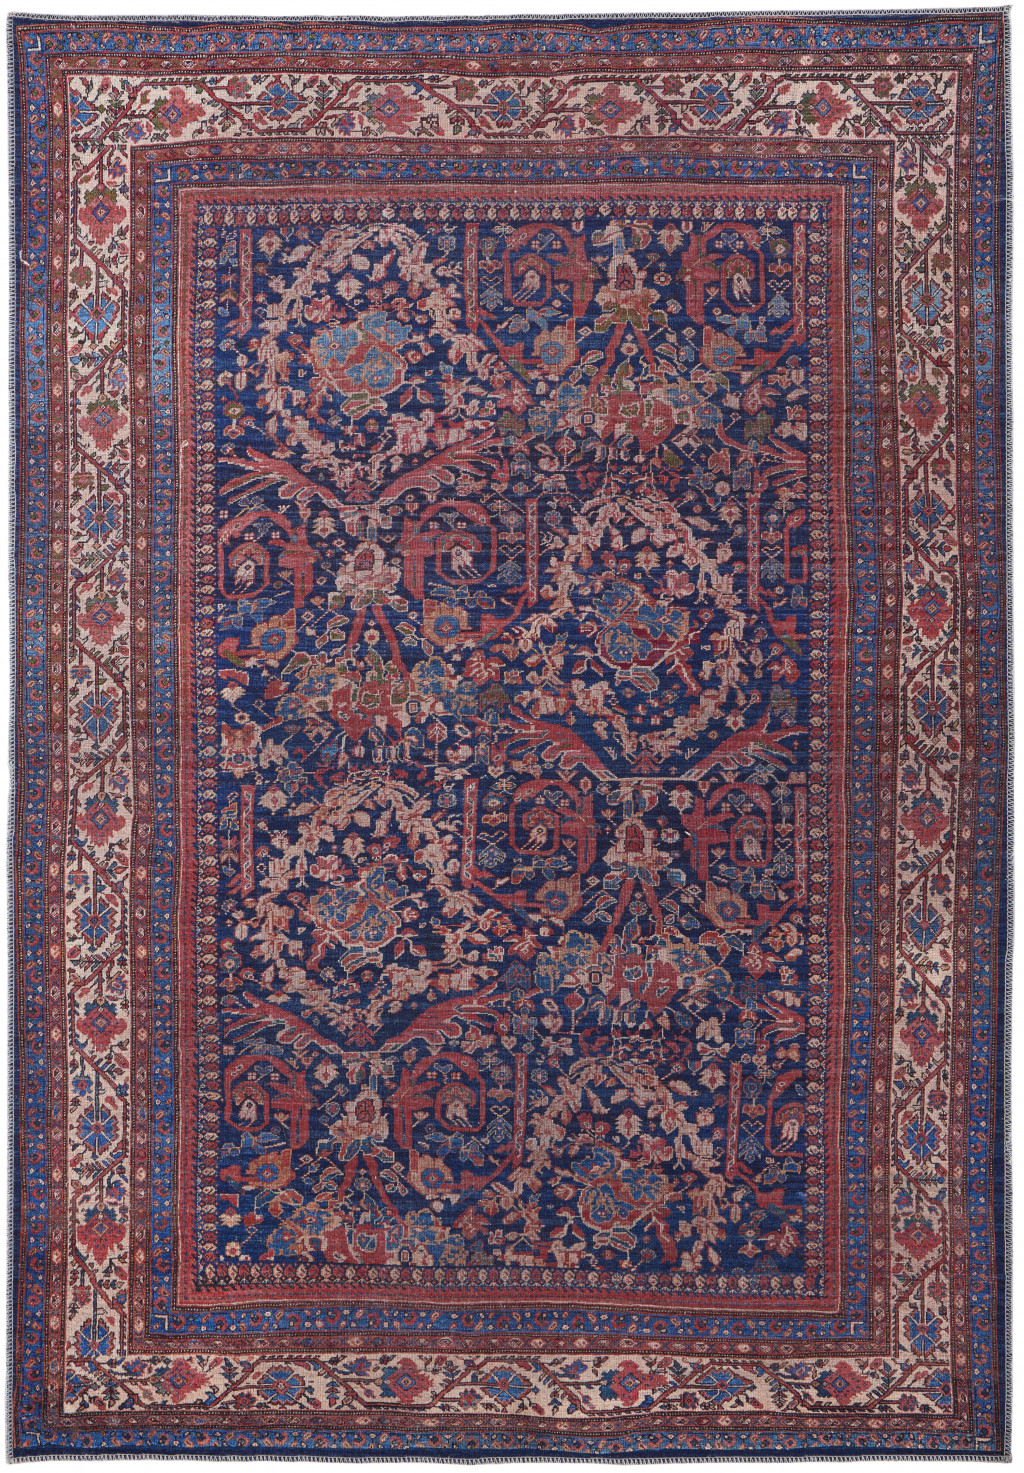 10' X 14' Red Blue And Tan Floral Power Loom Area Rug-515109-1